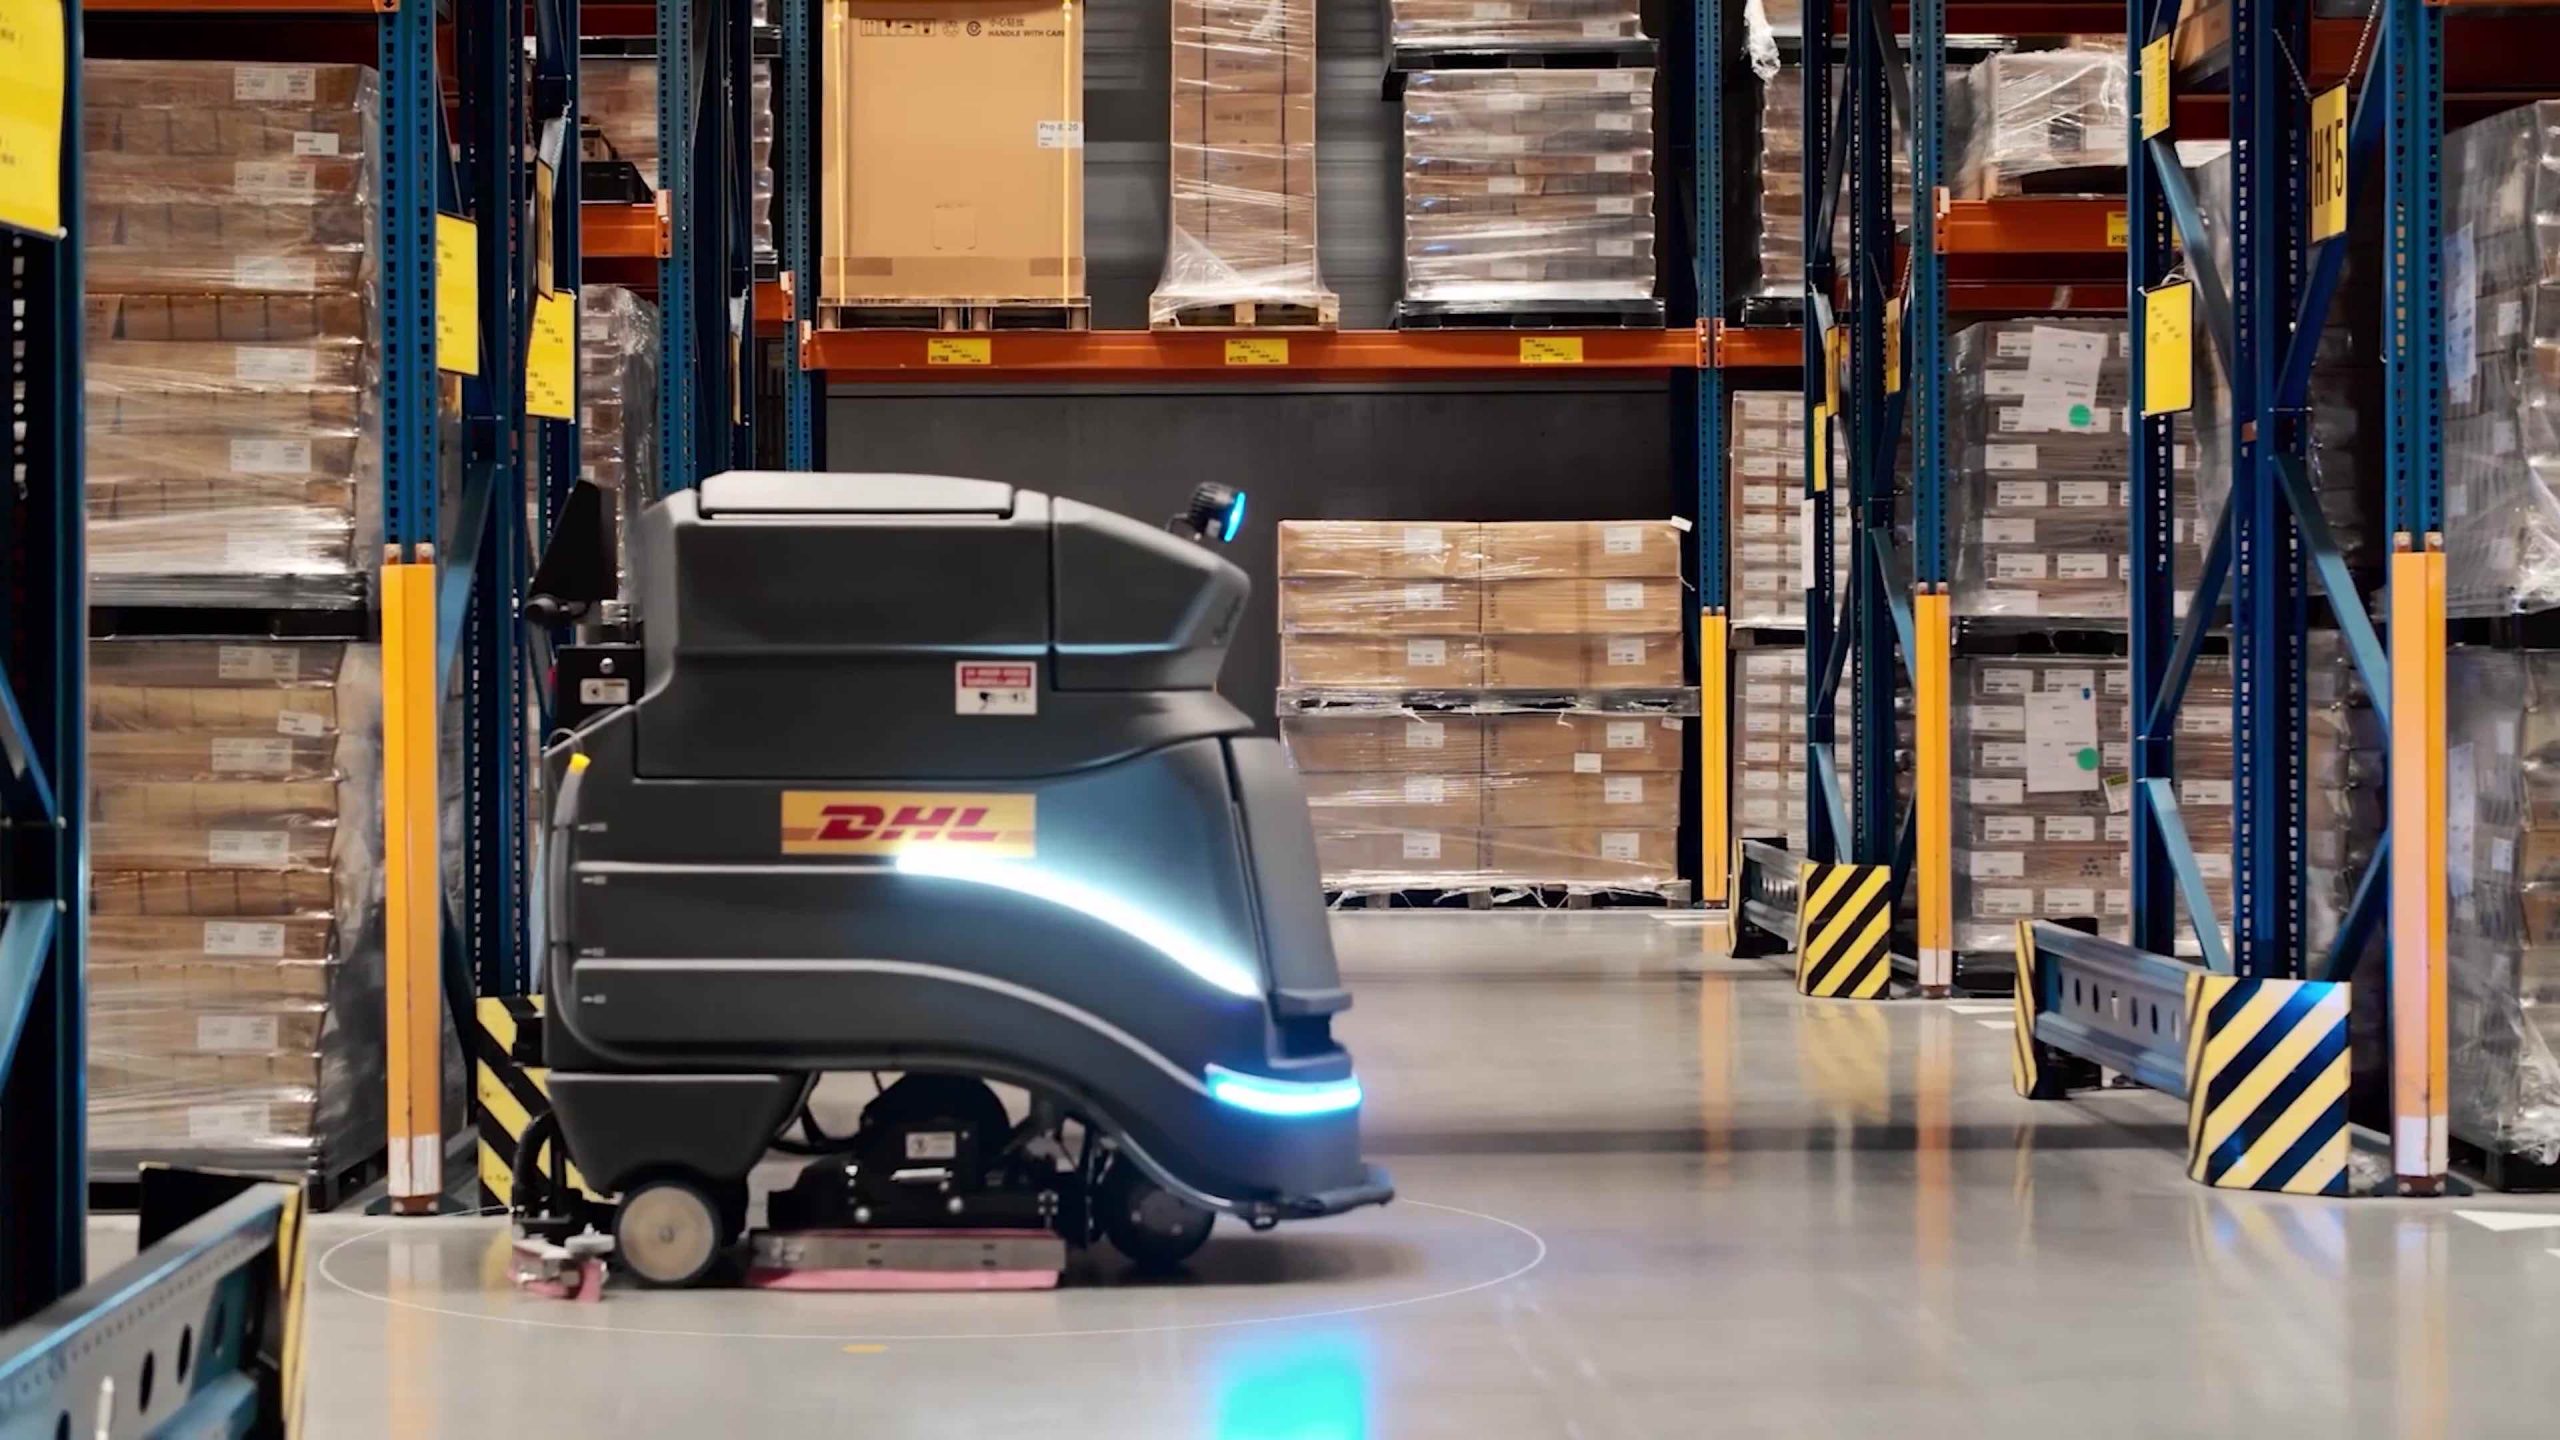 Warehouse automation sees robots take to the floor